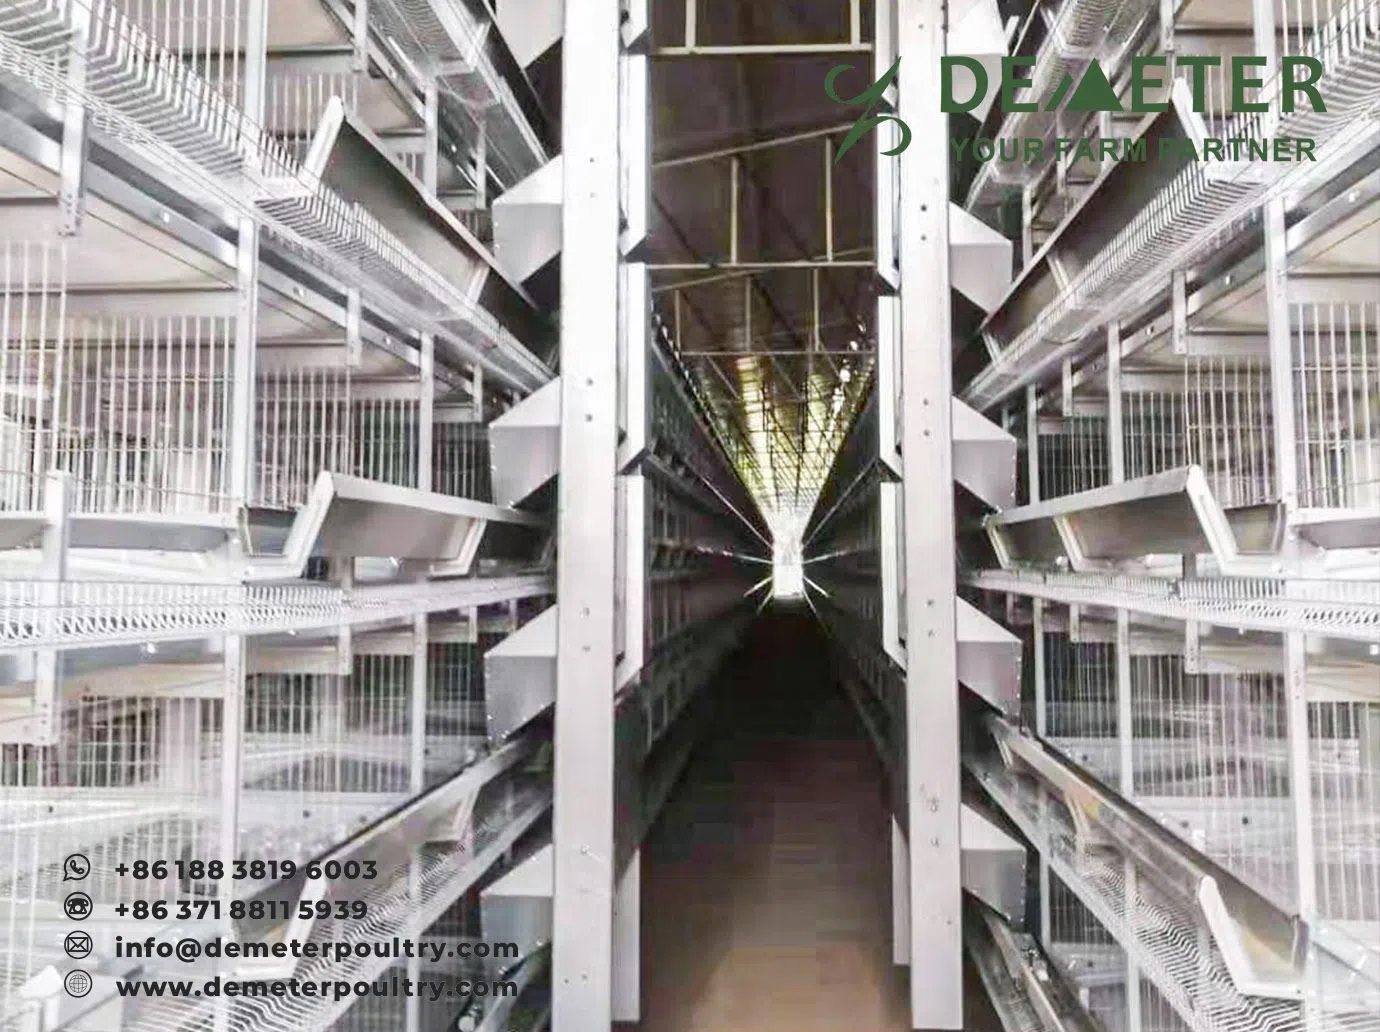 60,000PCS Layer Chicken Cage Project In Lahore Pakistan